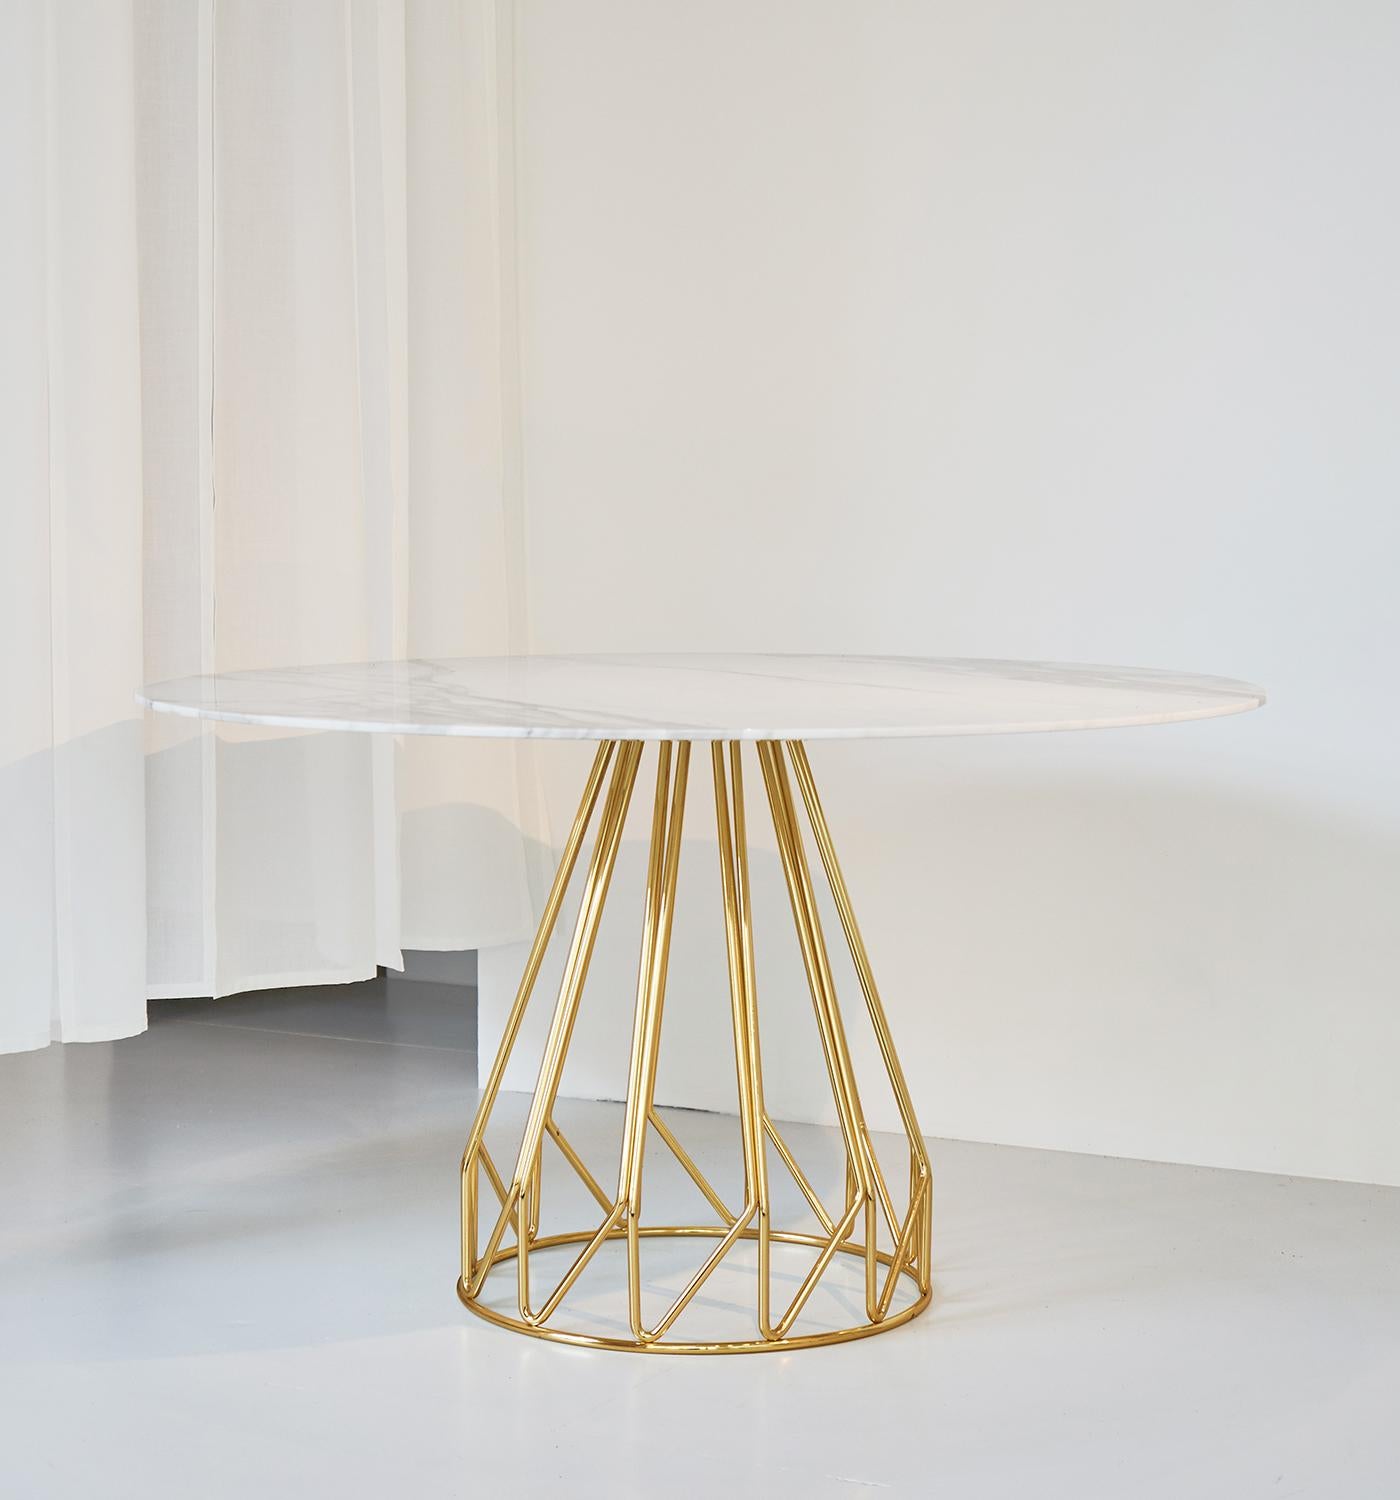 An harmonic sequence of metal wires folded in here, each element is part of a large, light and structured whole whit real Calacatta Green Marble top diameter of 1300
Madama table is available with many different marble and glass top.
Madama table,